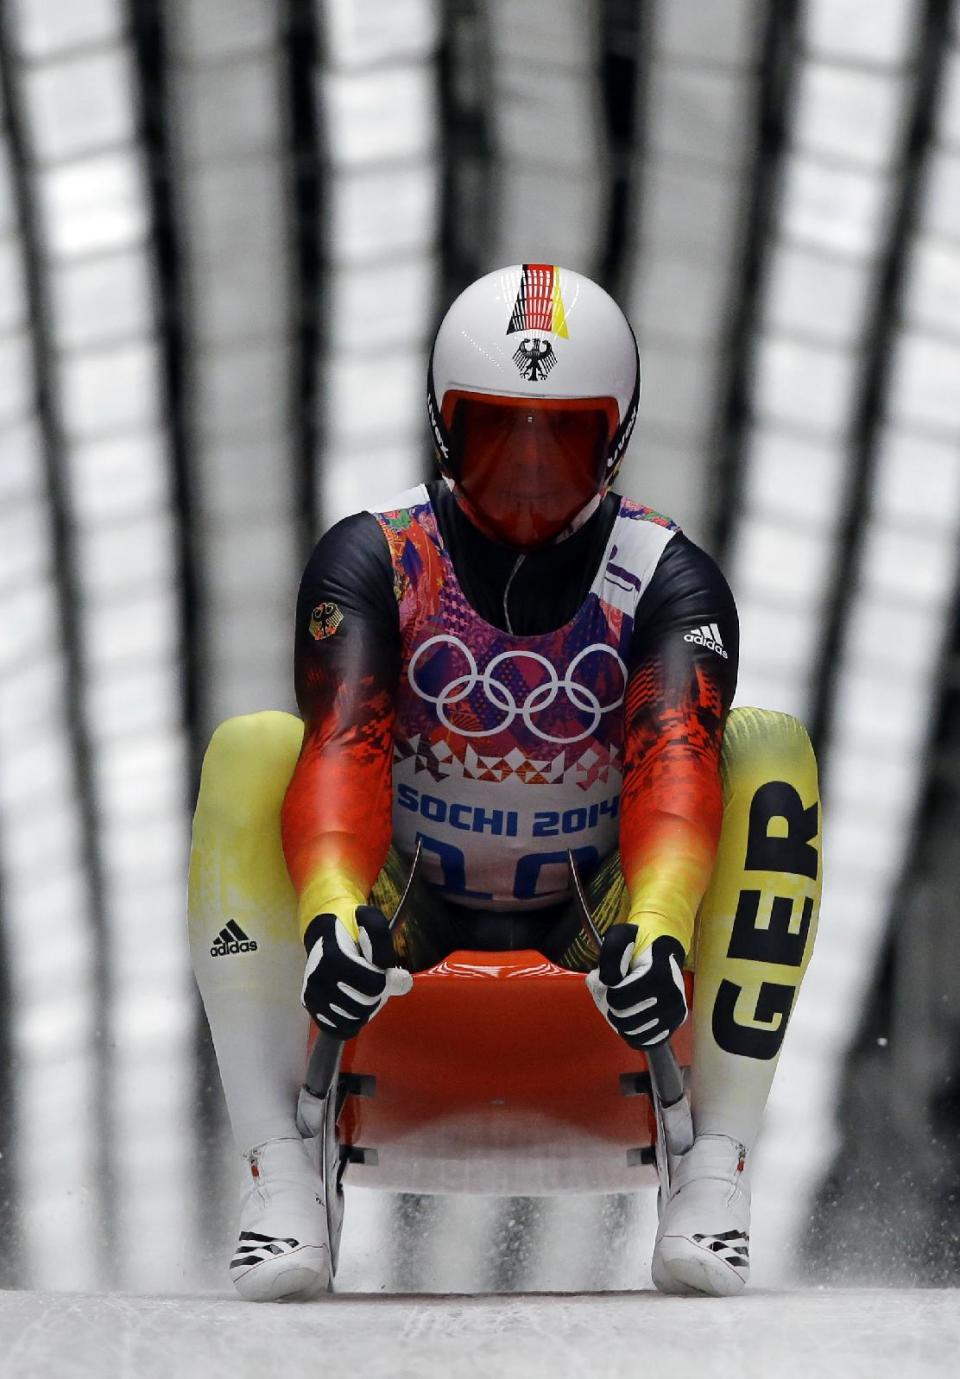 Felix Loch of Germany brakes after finishing his second run during the men's singles luge competition at the 2014 Winter Olympics, Saturday, Feb. 8, 2014, in Krasnaya Polyana, Russia. (AP Photo/Dita Alangkara)